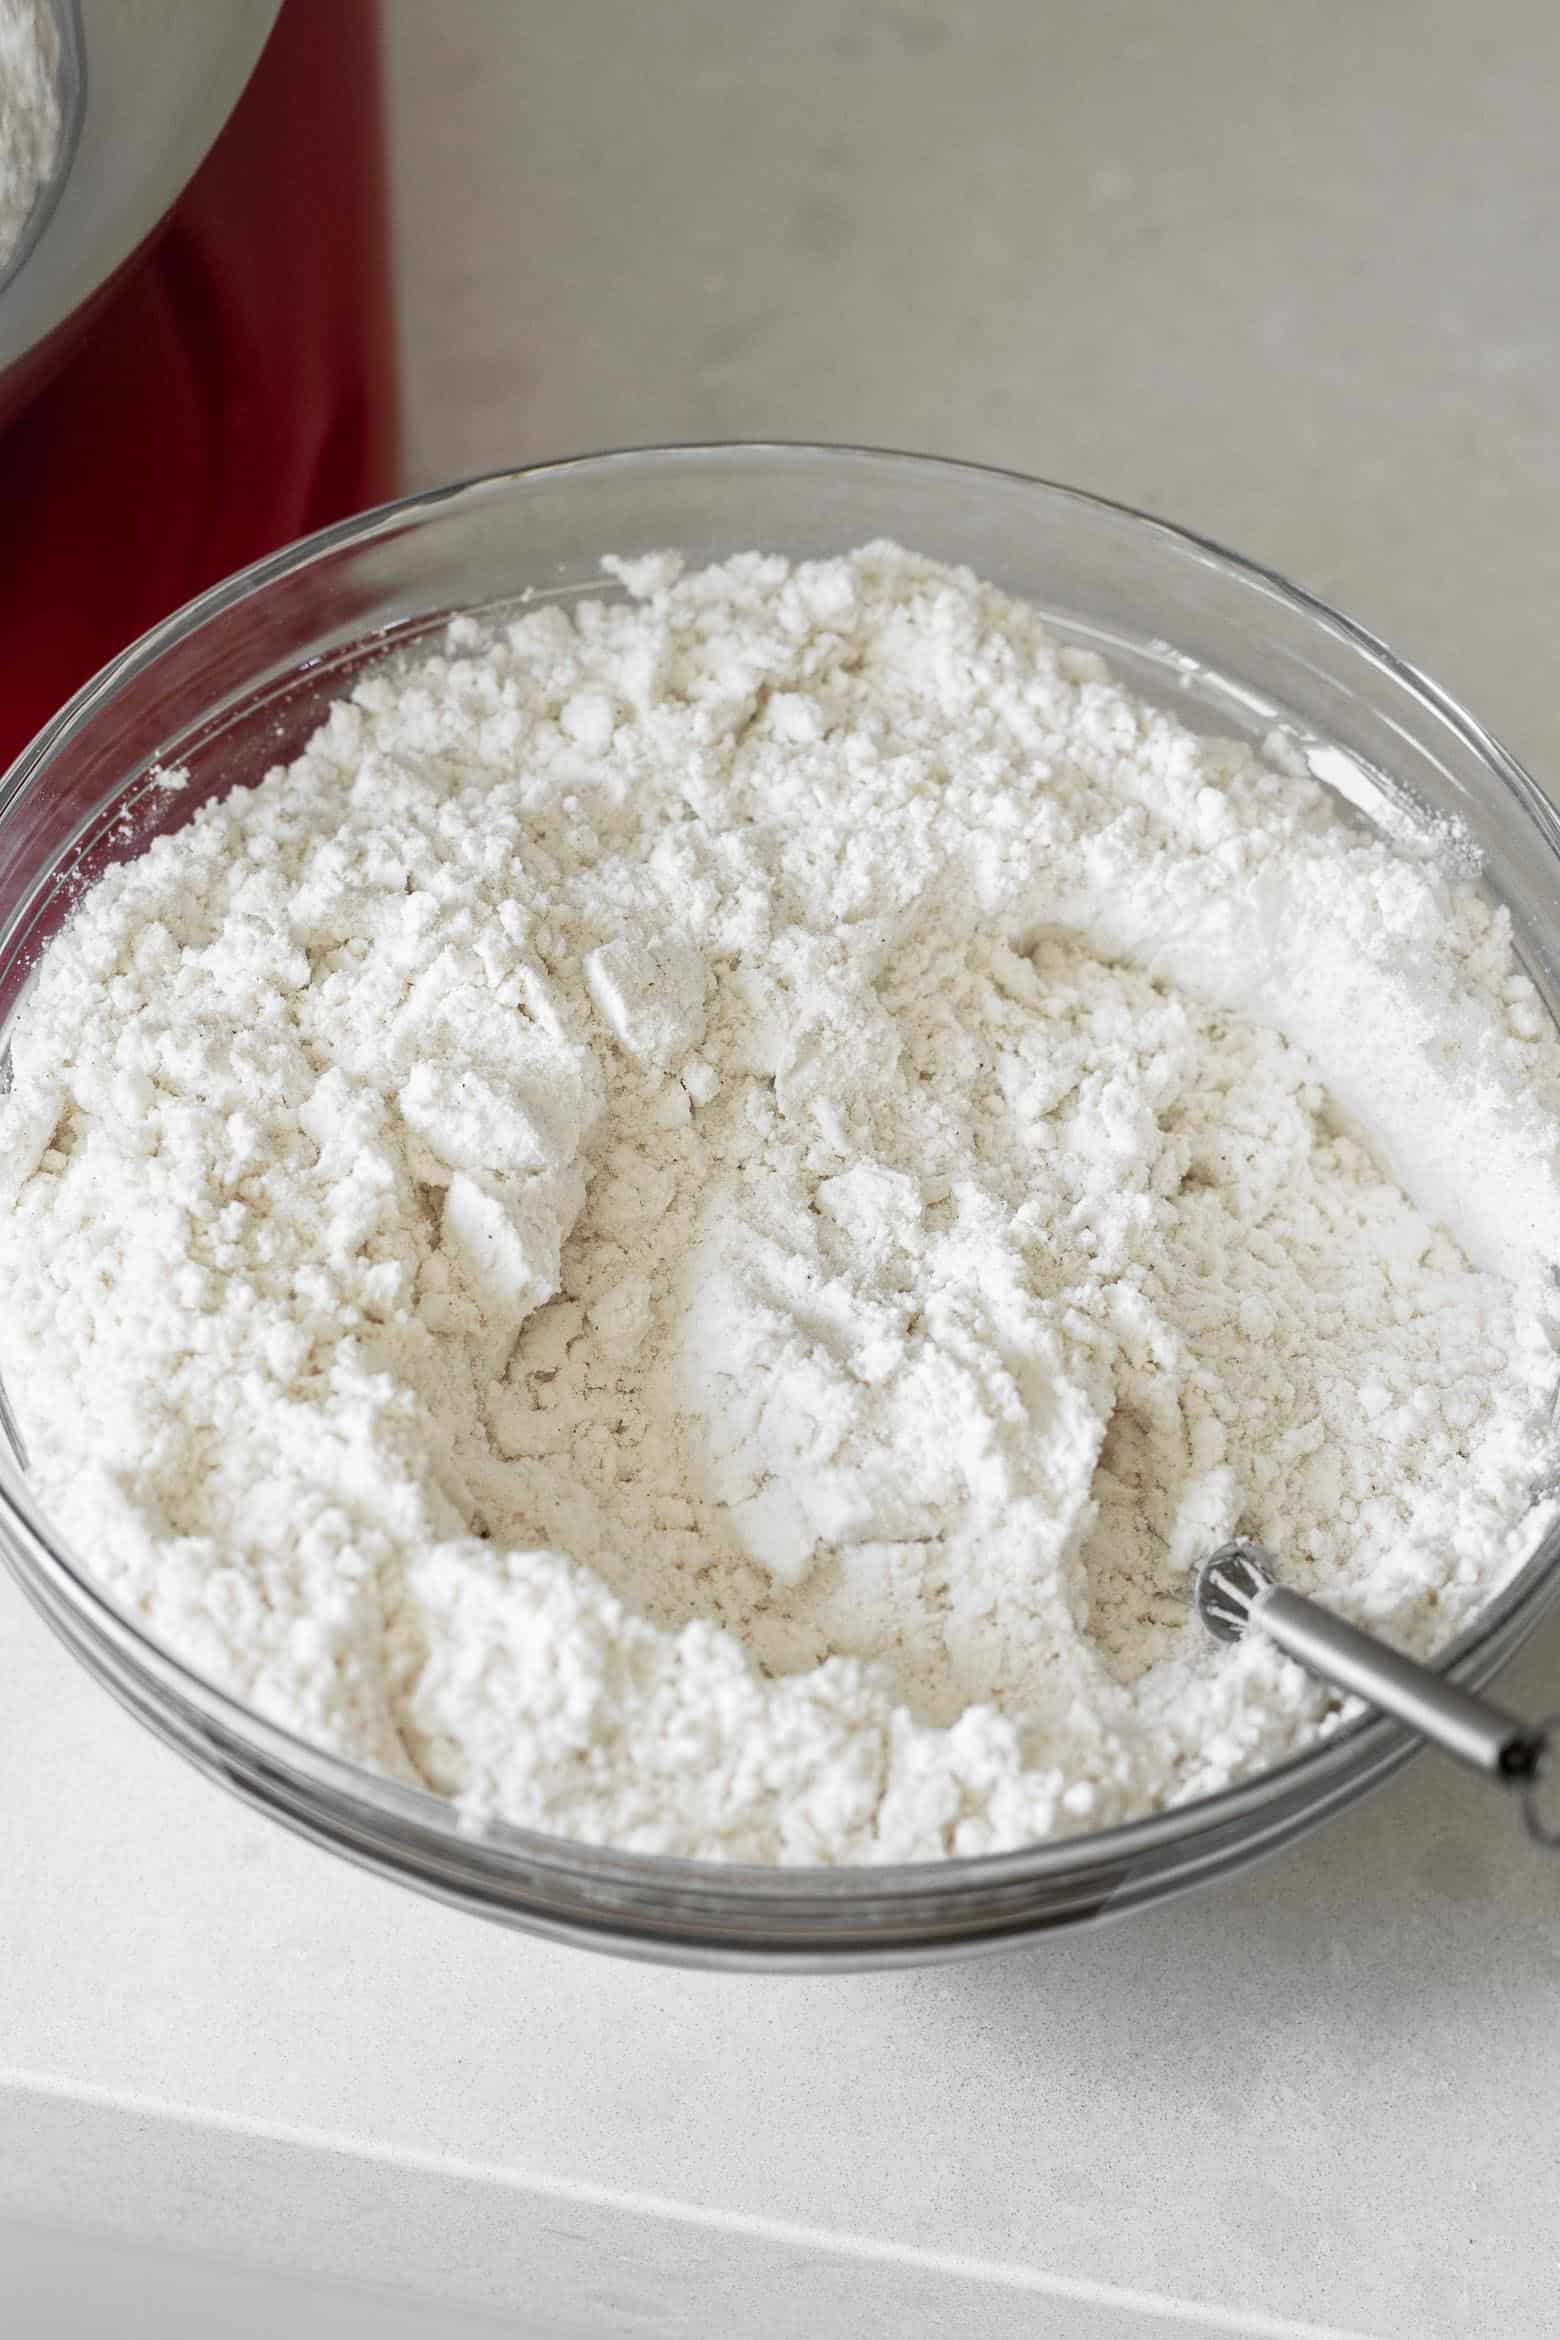 Flour, salt, baking soda, and baking powder mixed together in a bowl.